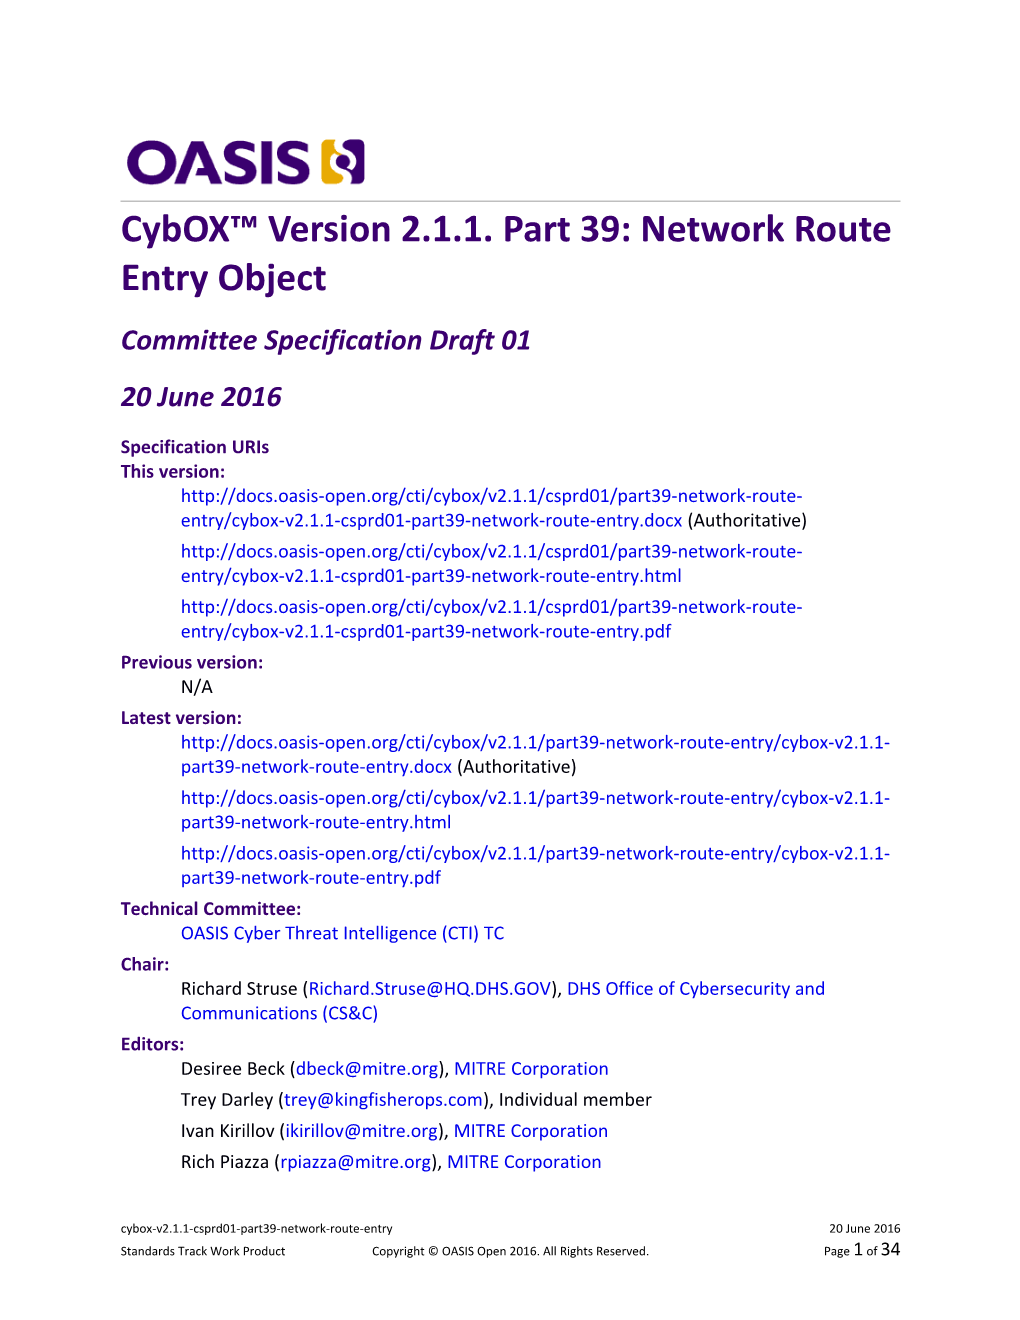 Cybox Version 2.1.1. Part 39: Network Route Entry Object